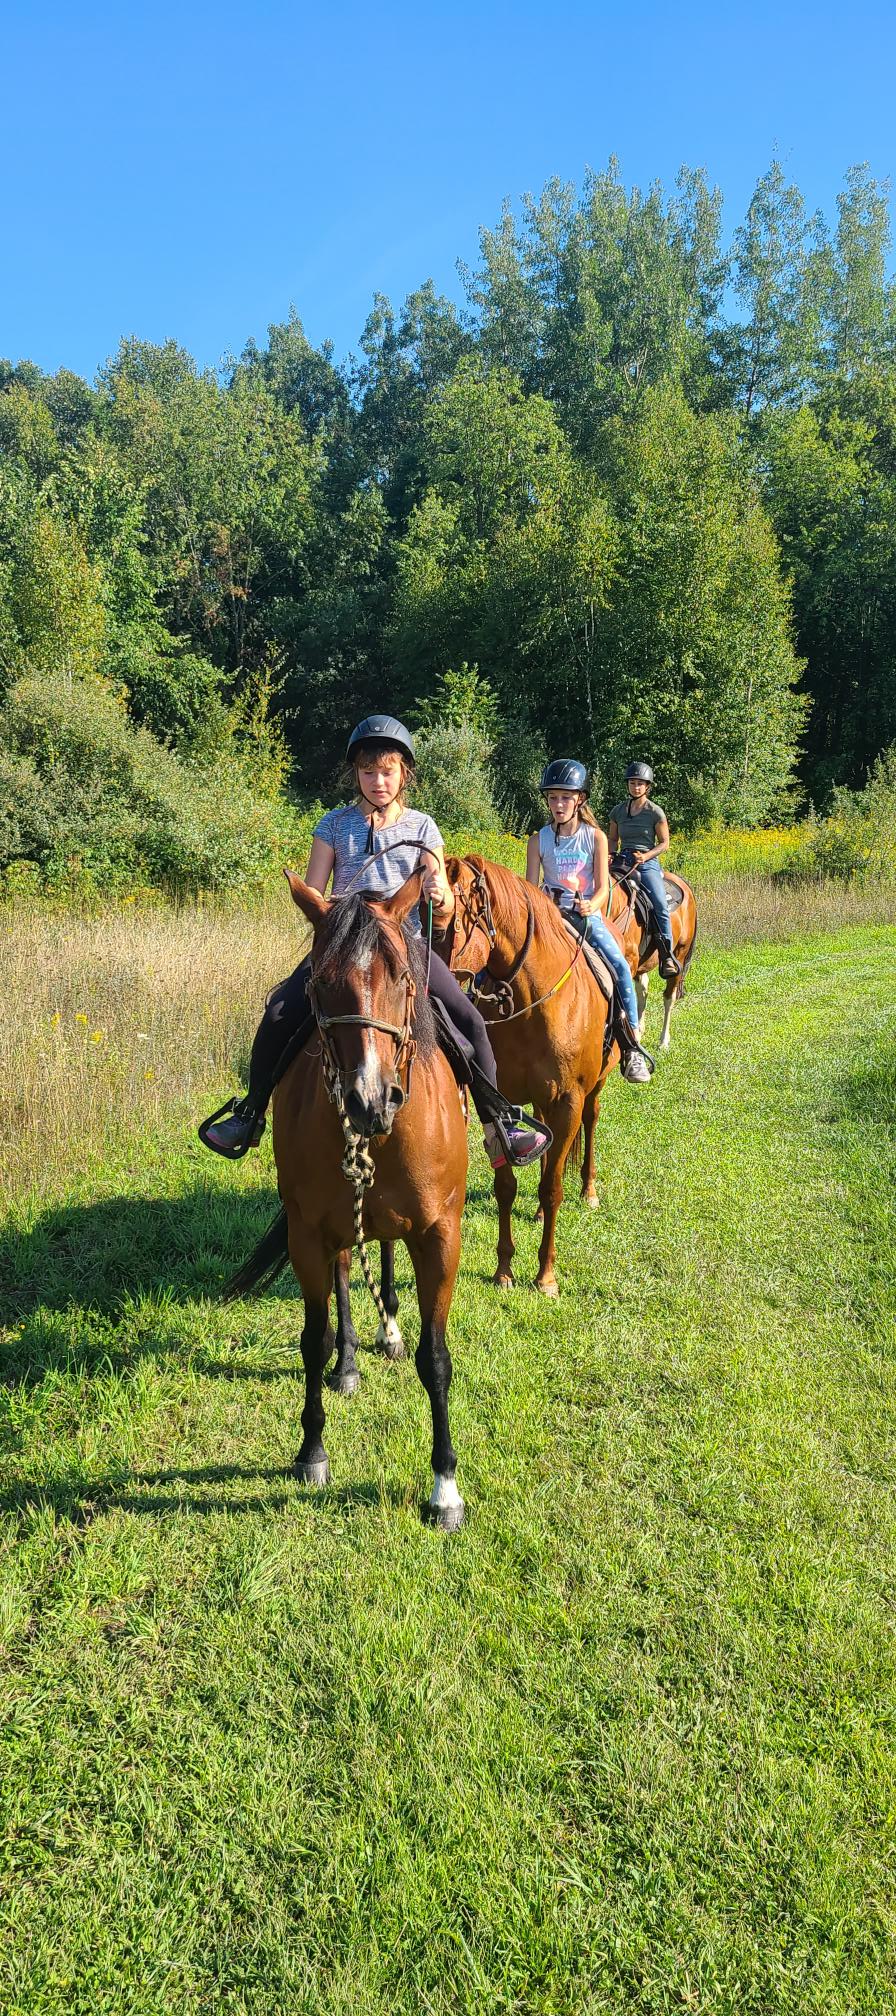 Trail riding is one of our equestrian programs at The Fowler Center